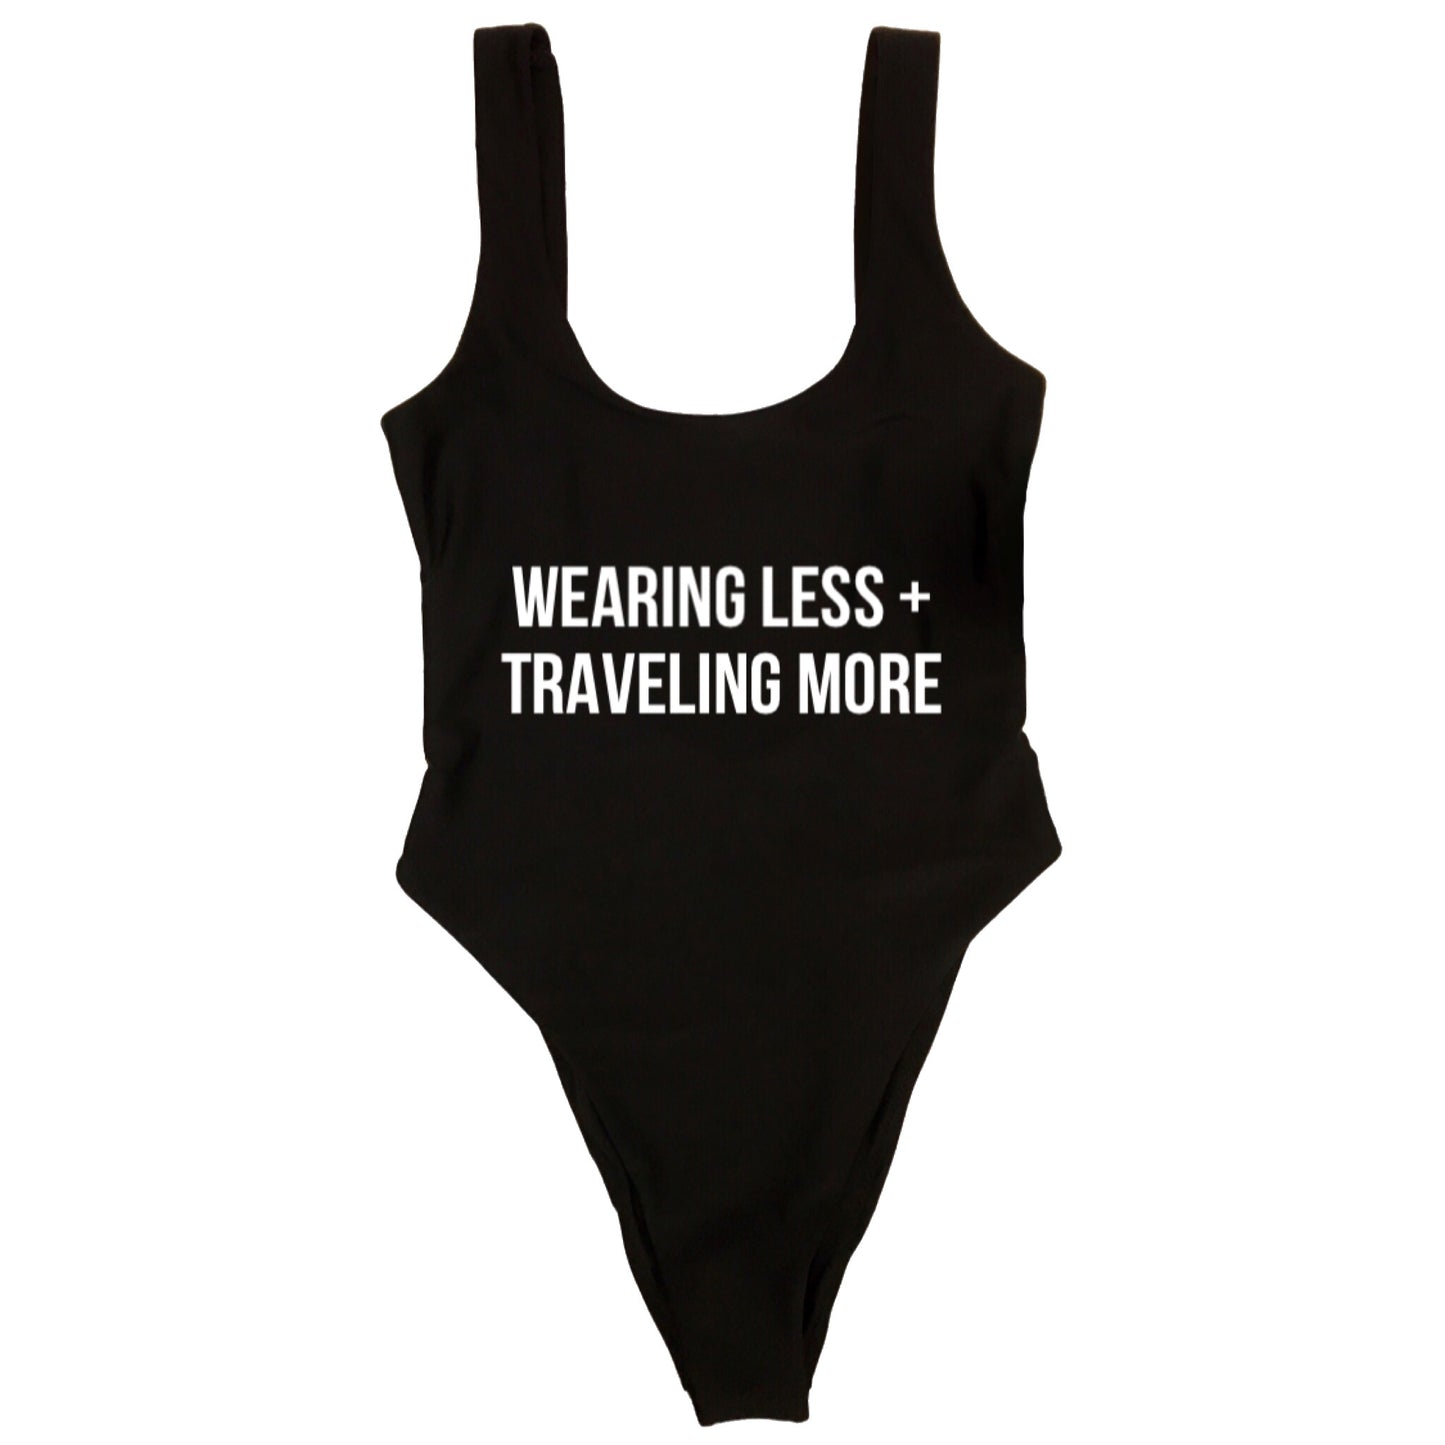 WEARING LESS + TRAVELING MORE